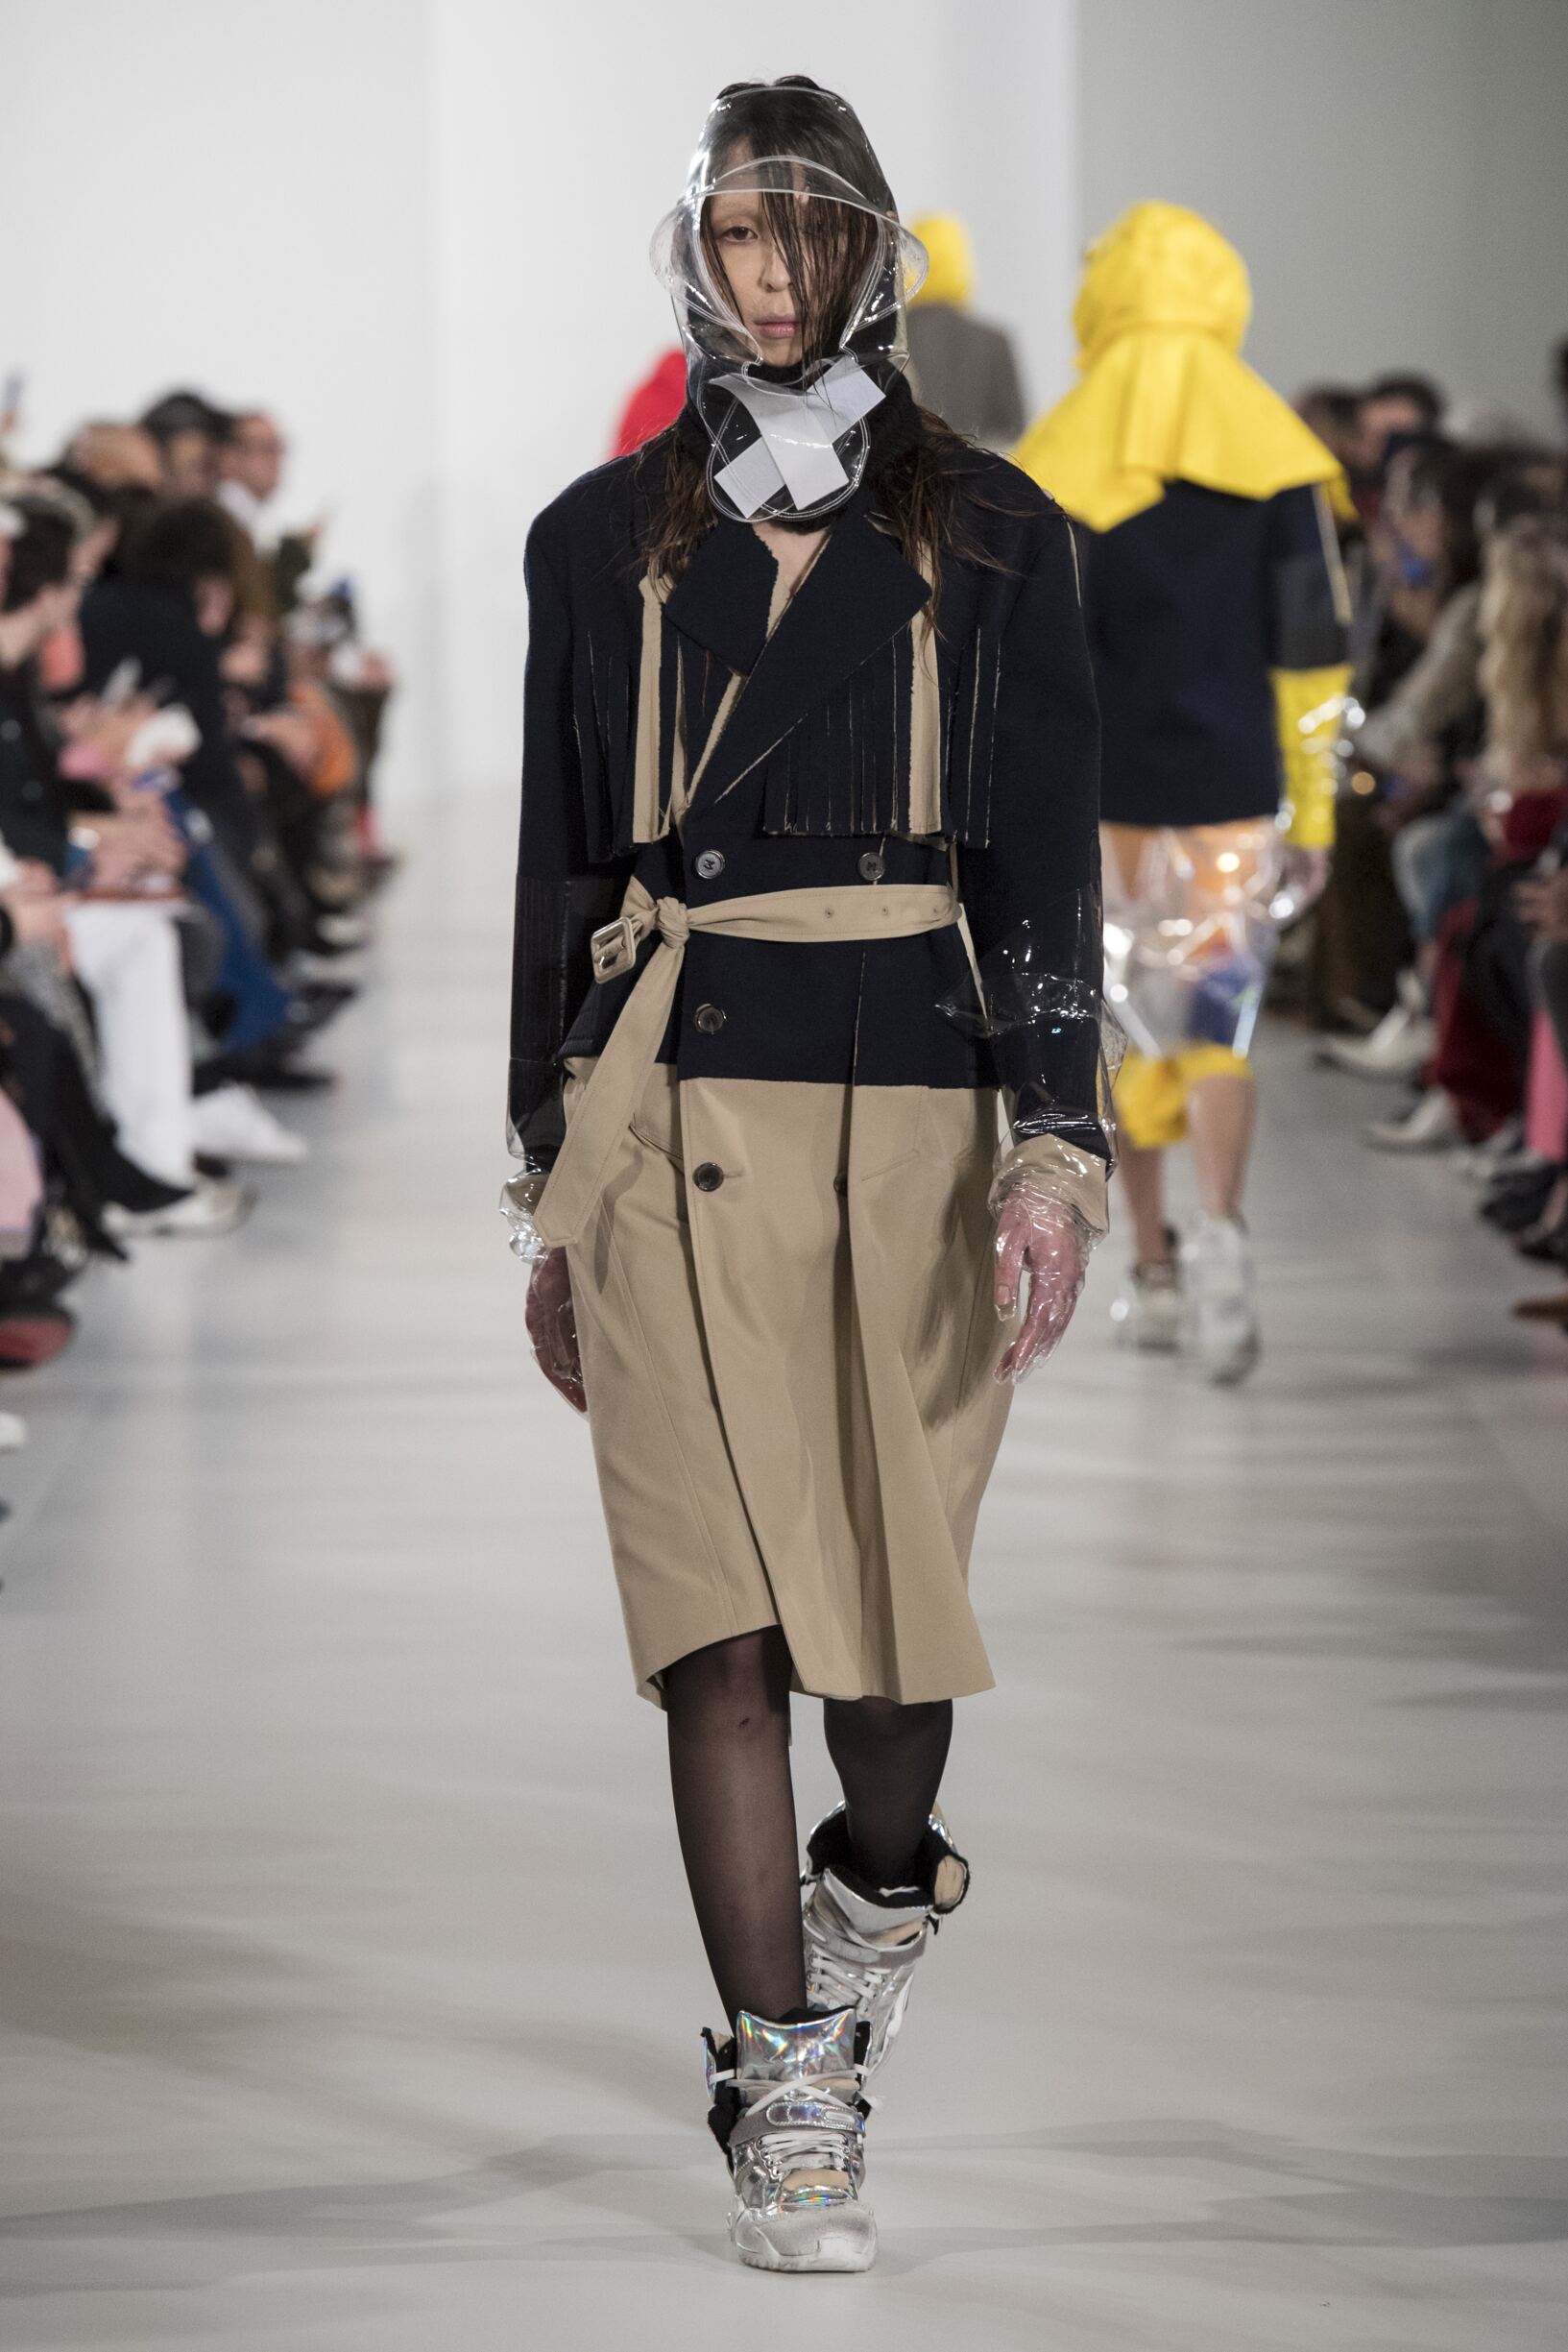 MAISON MARGIELA FALL WINTER 2018 WOMEN'S COLLECTION | The ...